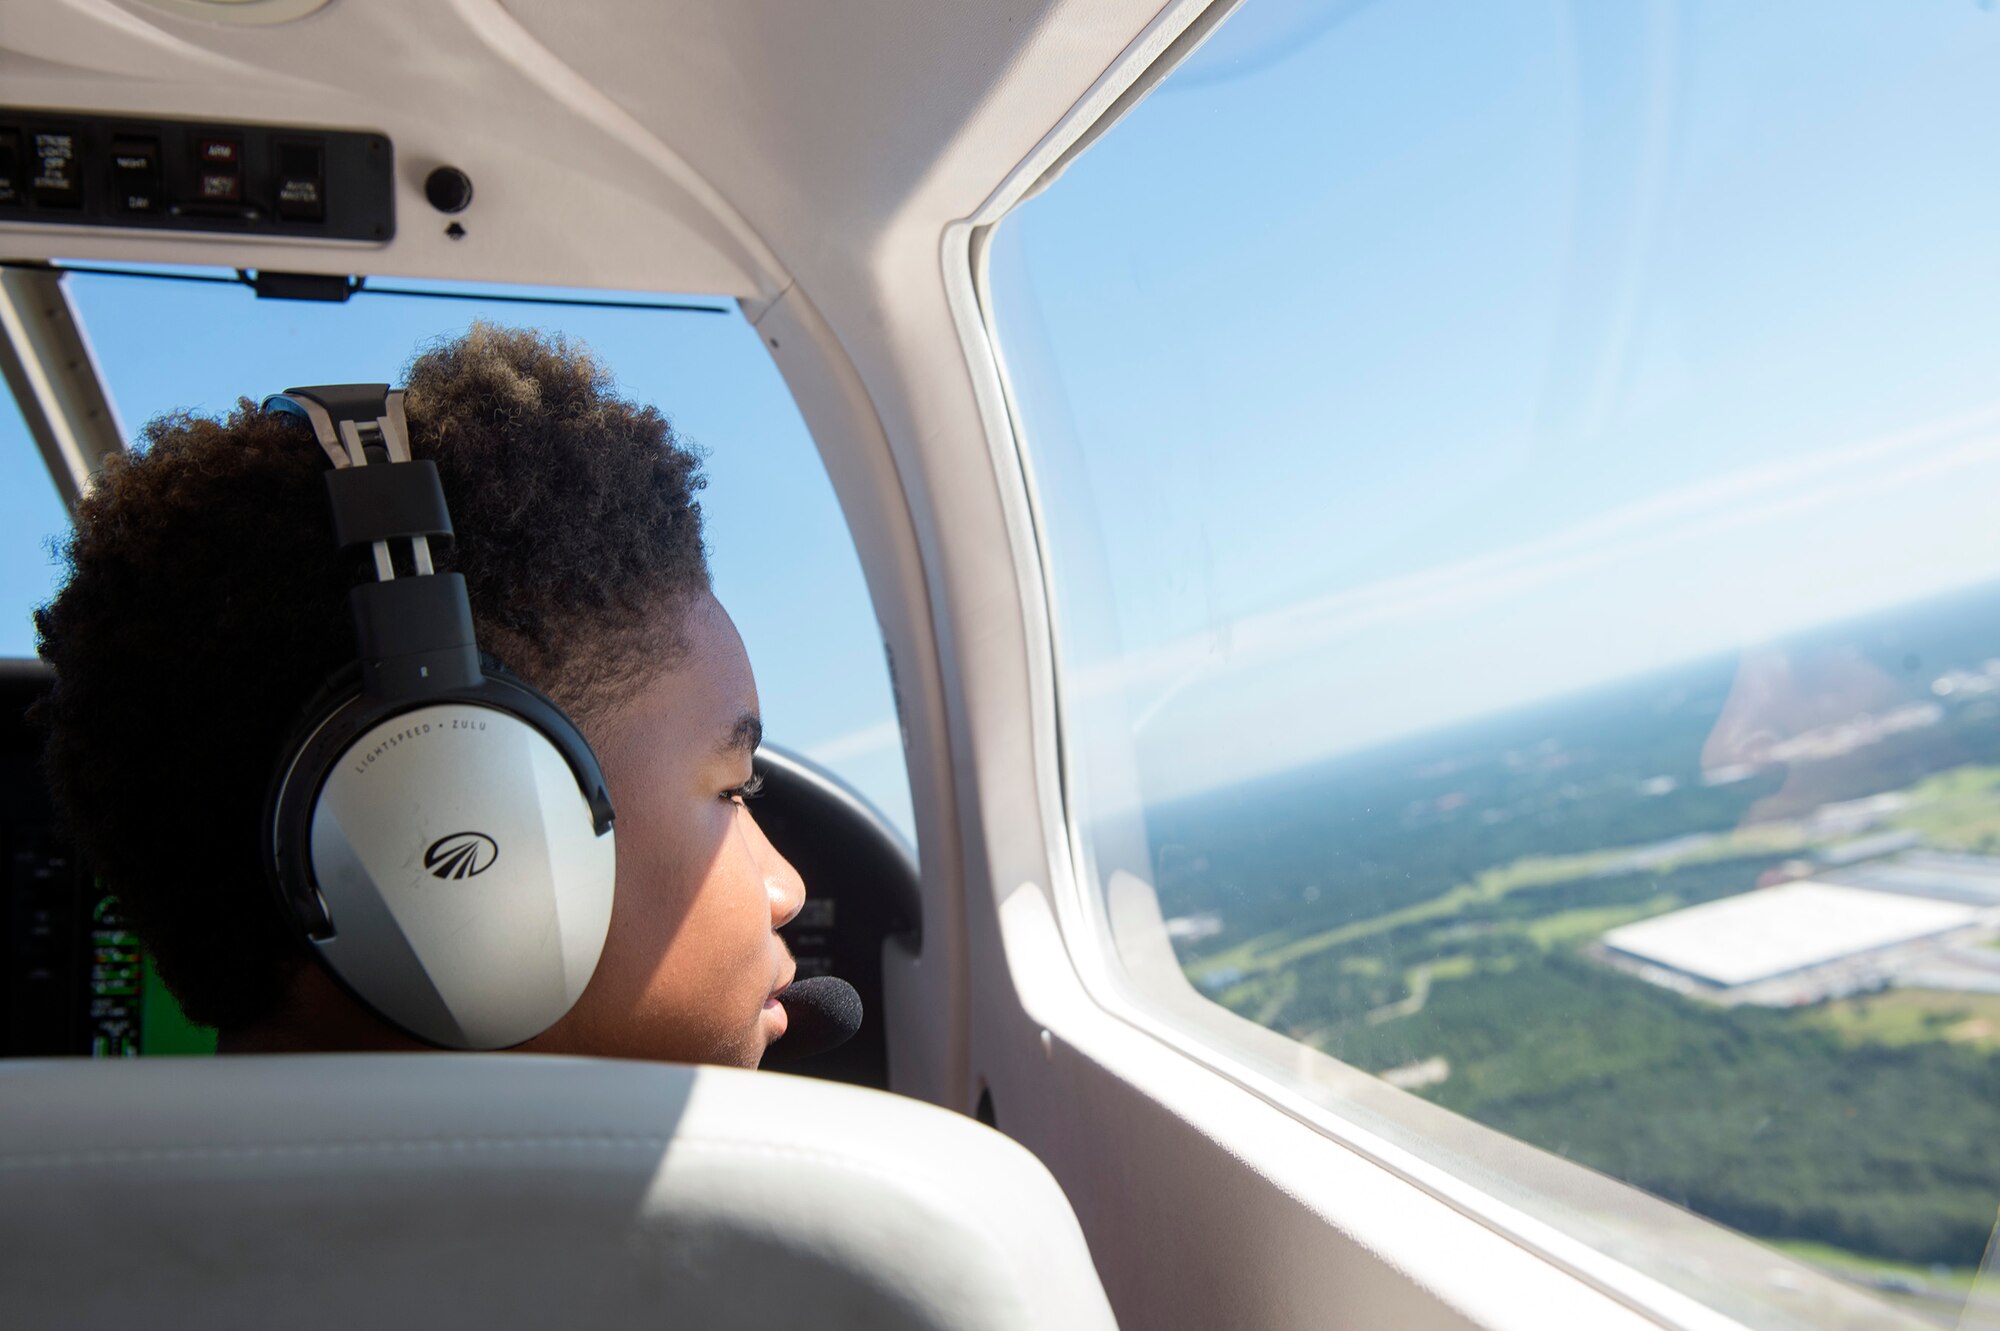 A South Georgian youth overlooks the skies as he co-pilots a Piper Archer aircraft during the Eyes Above the Horizon diversity outreach program, July 22, 2017, in Valdosta, Ga. Moody Airmen, service members nationwide and collegiate representatives taught approximately 100 10-19-year-olds about aviation as they took the Valdosta skies to commemorate the 76th Anniversary of the historic Tuskegee Airmen. The program focuses on mentoring and familiarizing underrepresented minorities with basic flying fundamentals. (U.S. Air Force photo by Senior Airman Greg Nash)